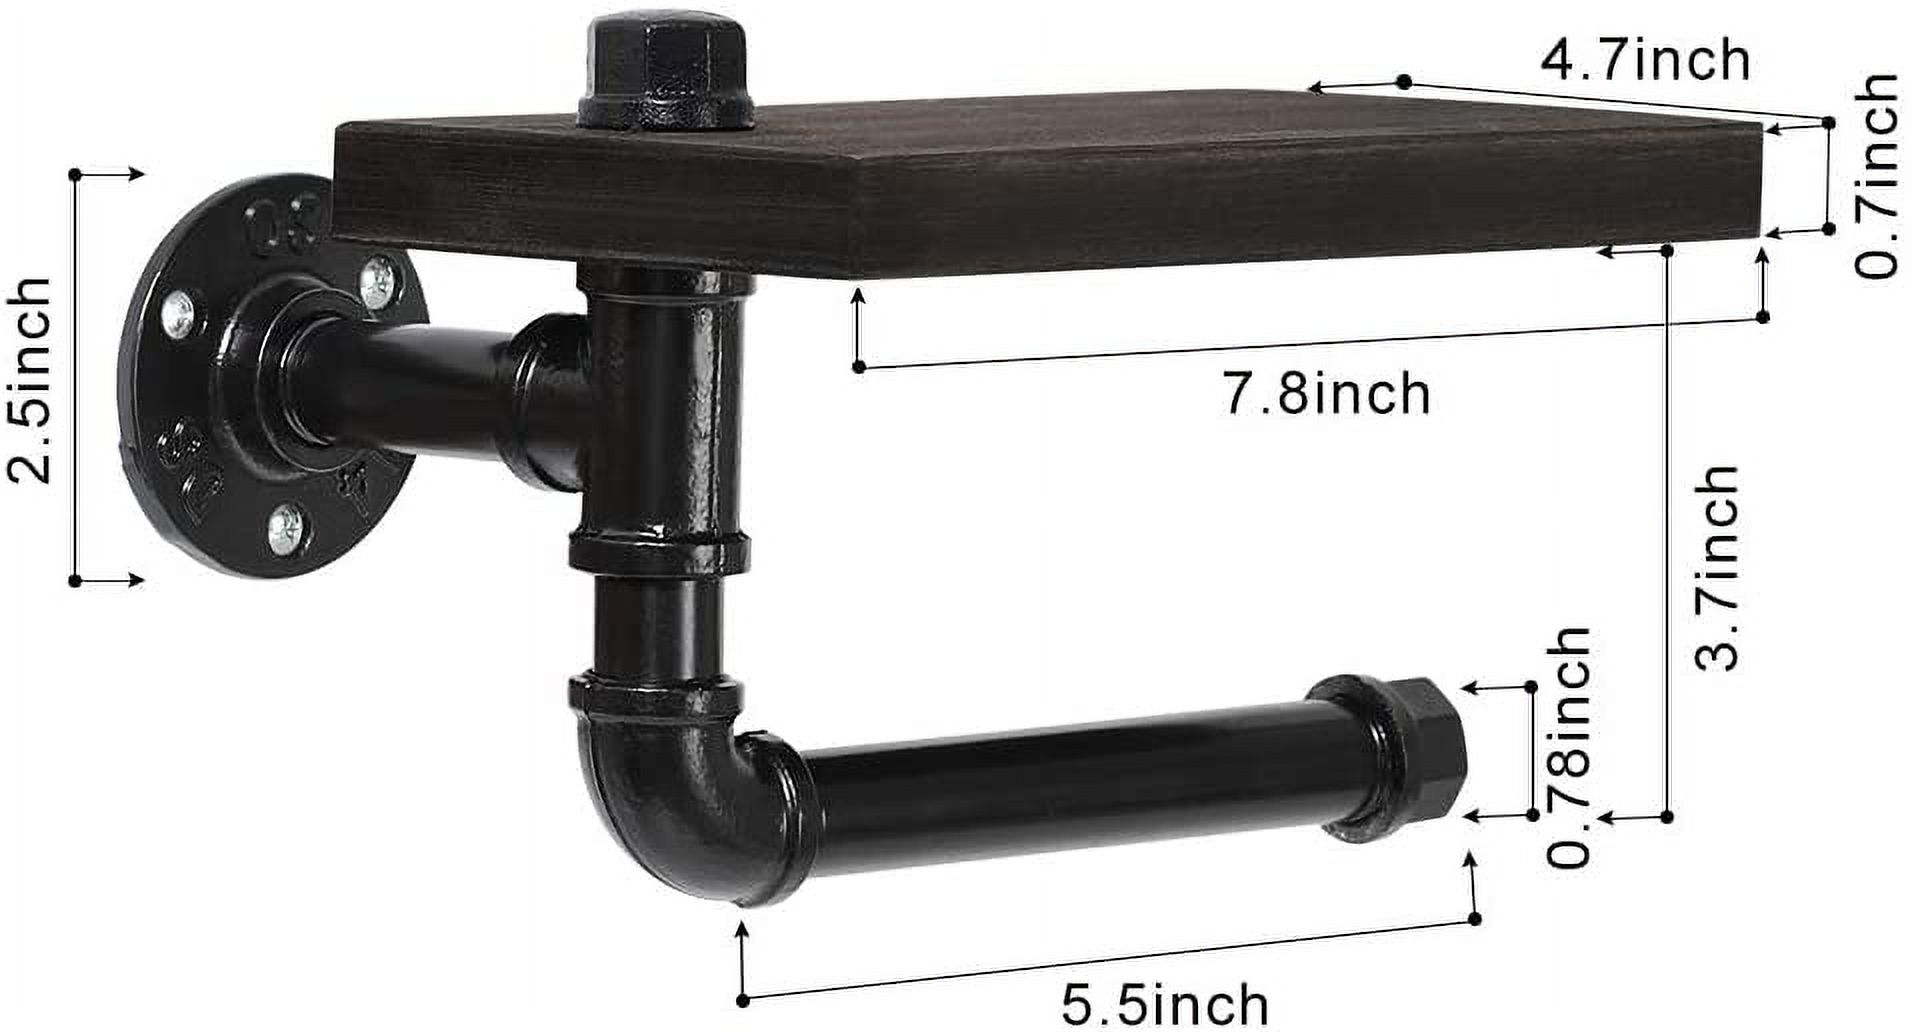 Wall Mounted Toilet Paper Holder with Rustic Wooden Shelf and Cast Iron Pipe by Oumilen - image 3 of 7